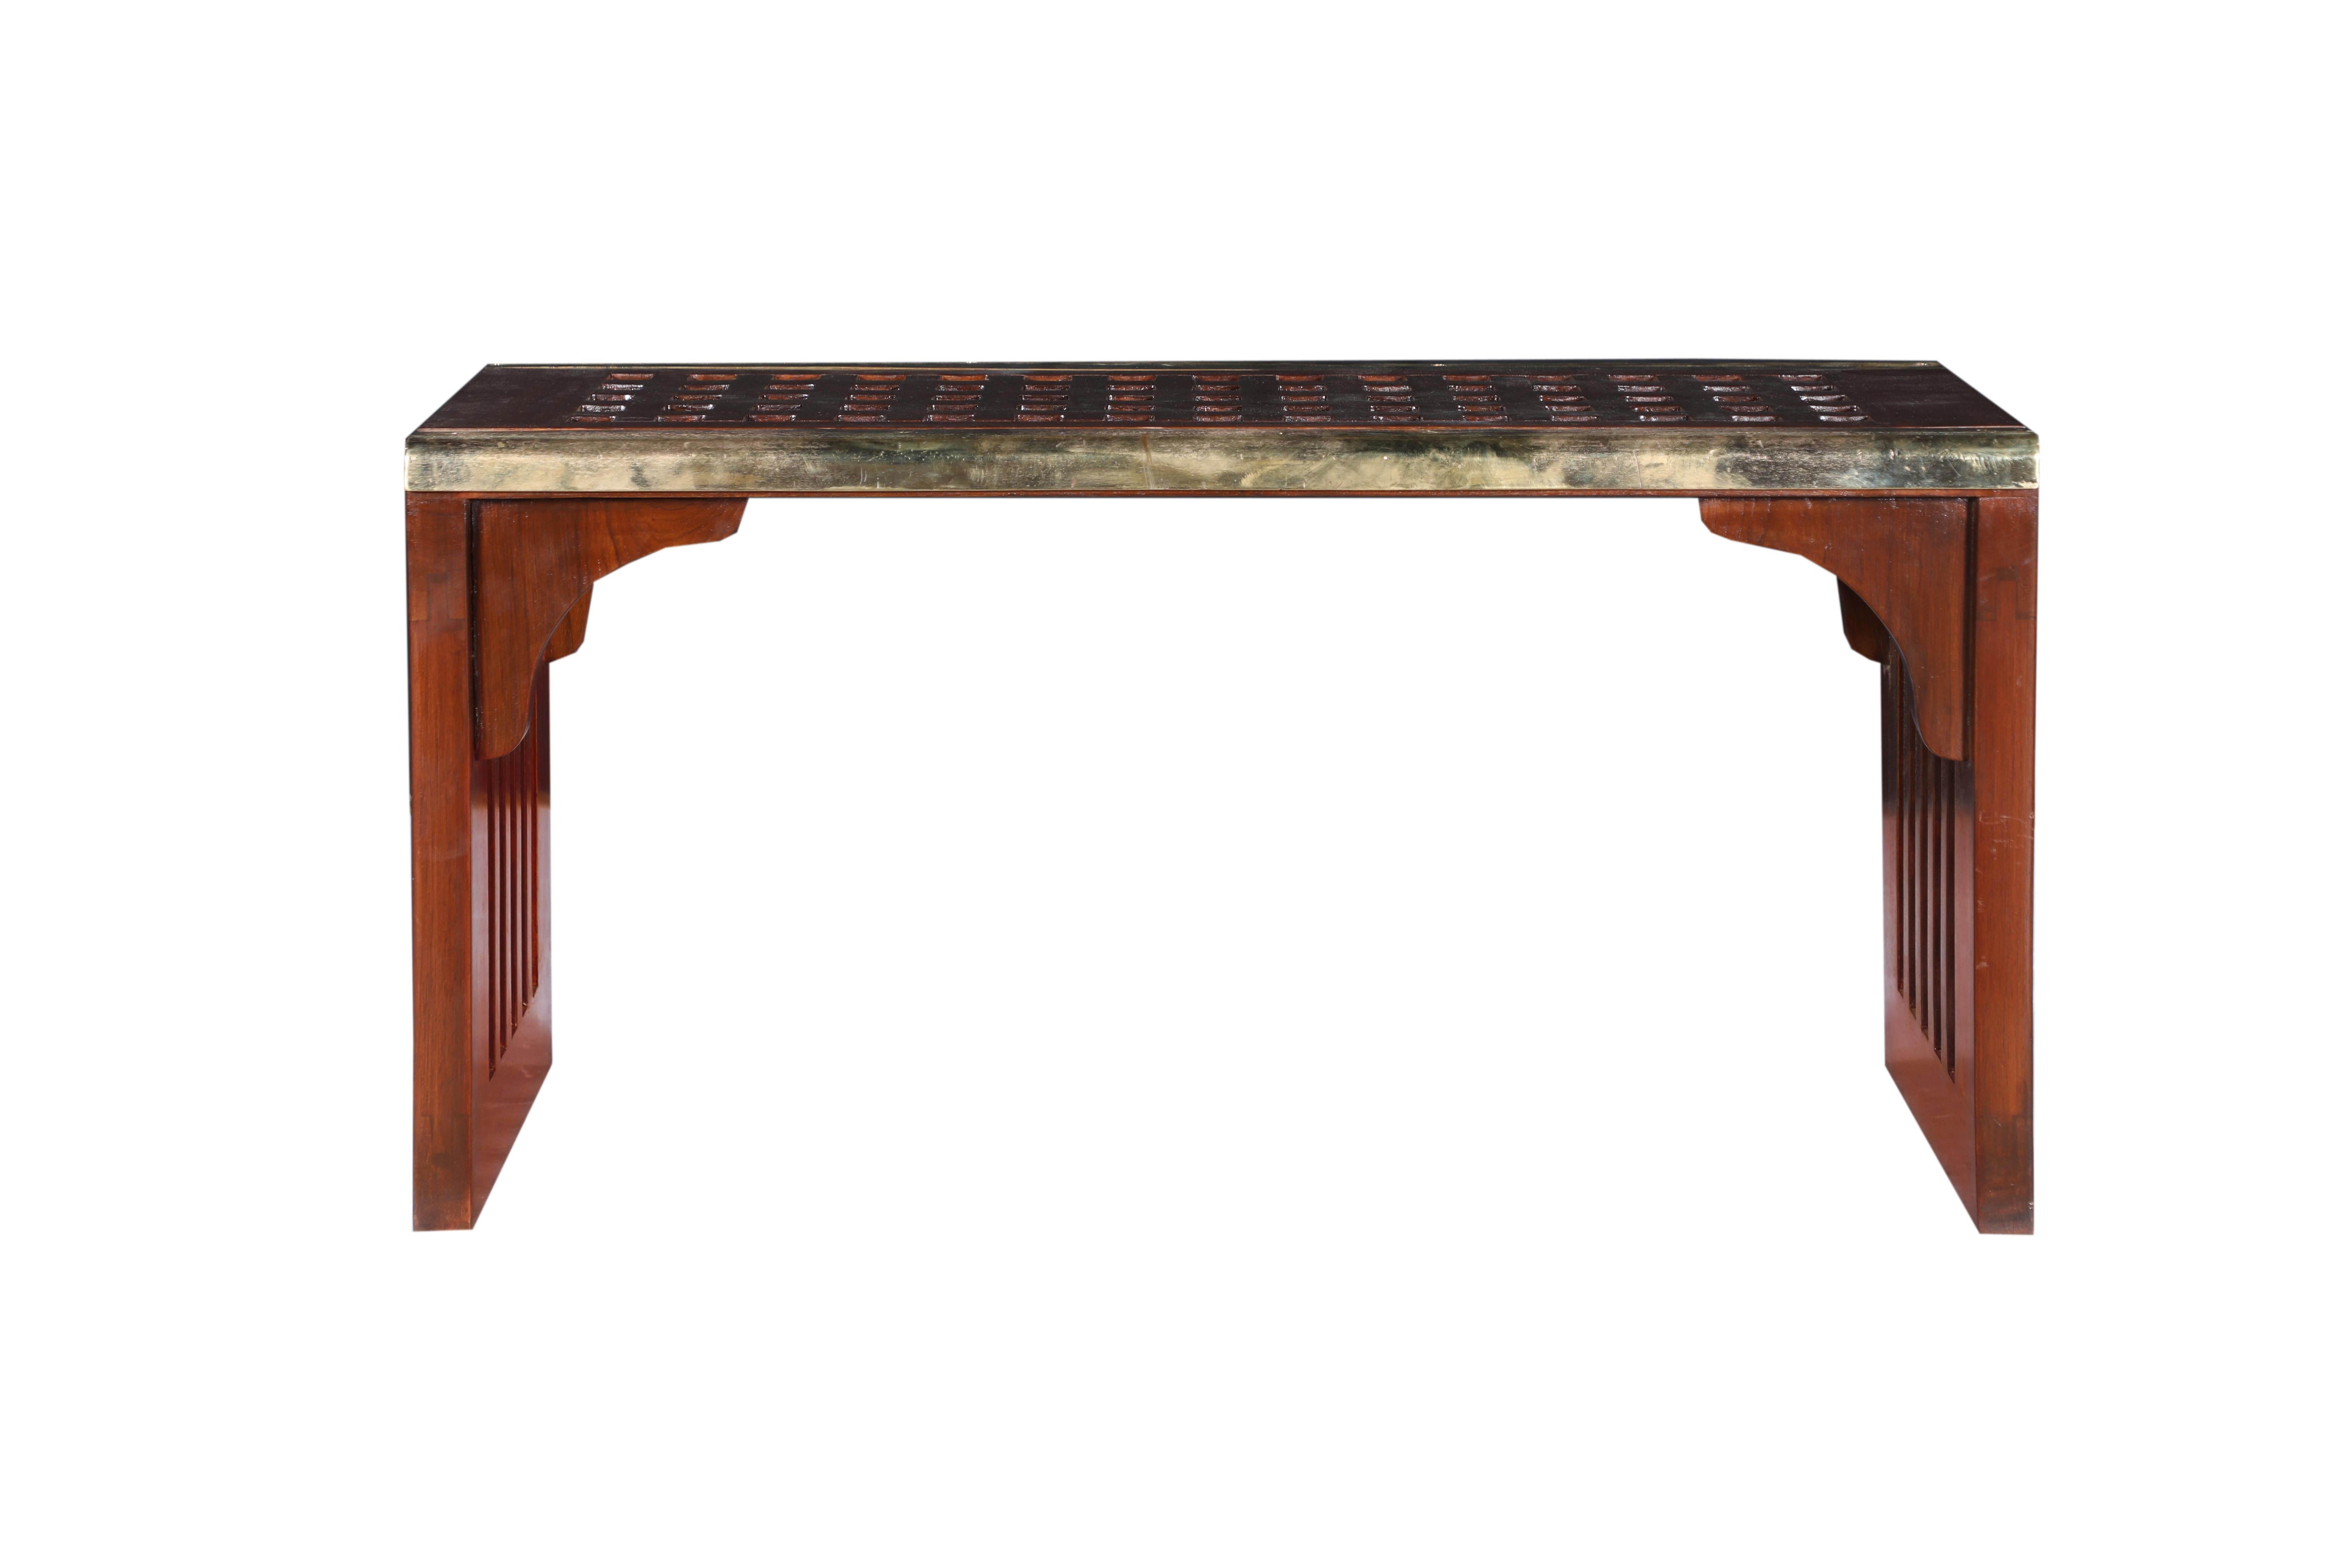 This table or bench is original teak decking from a large, decommissioned ship. Deborah Lockhart Phillips designed the piece to use as a coffee table or bench and incorporated old brass textured stair treads along the two long sides. Also done as a